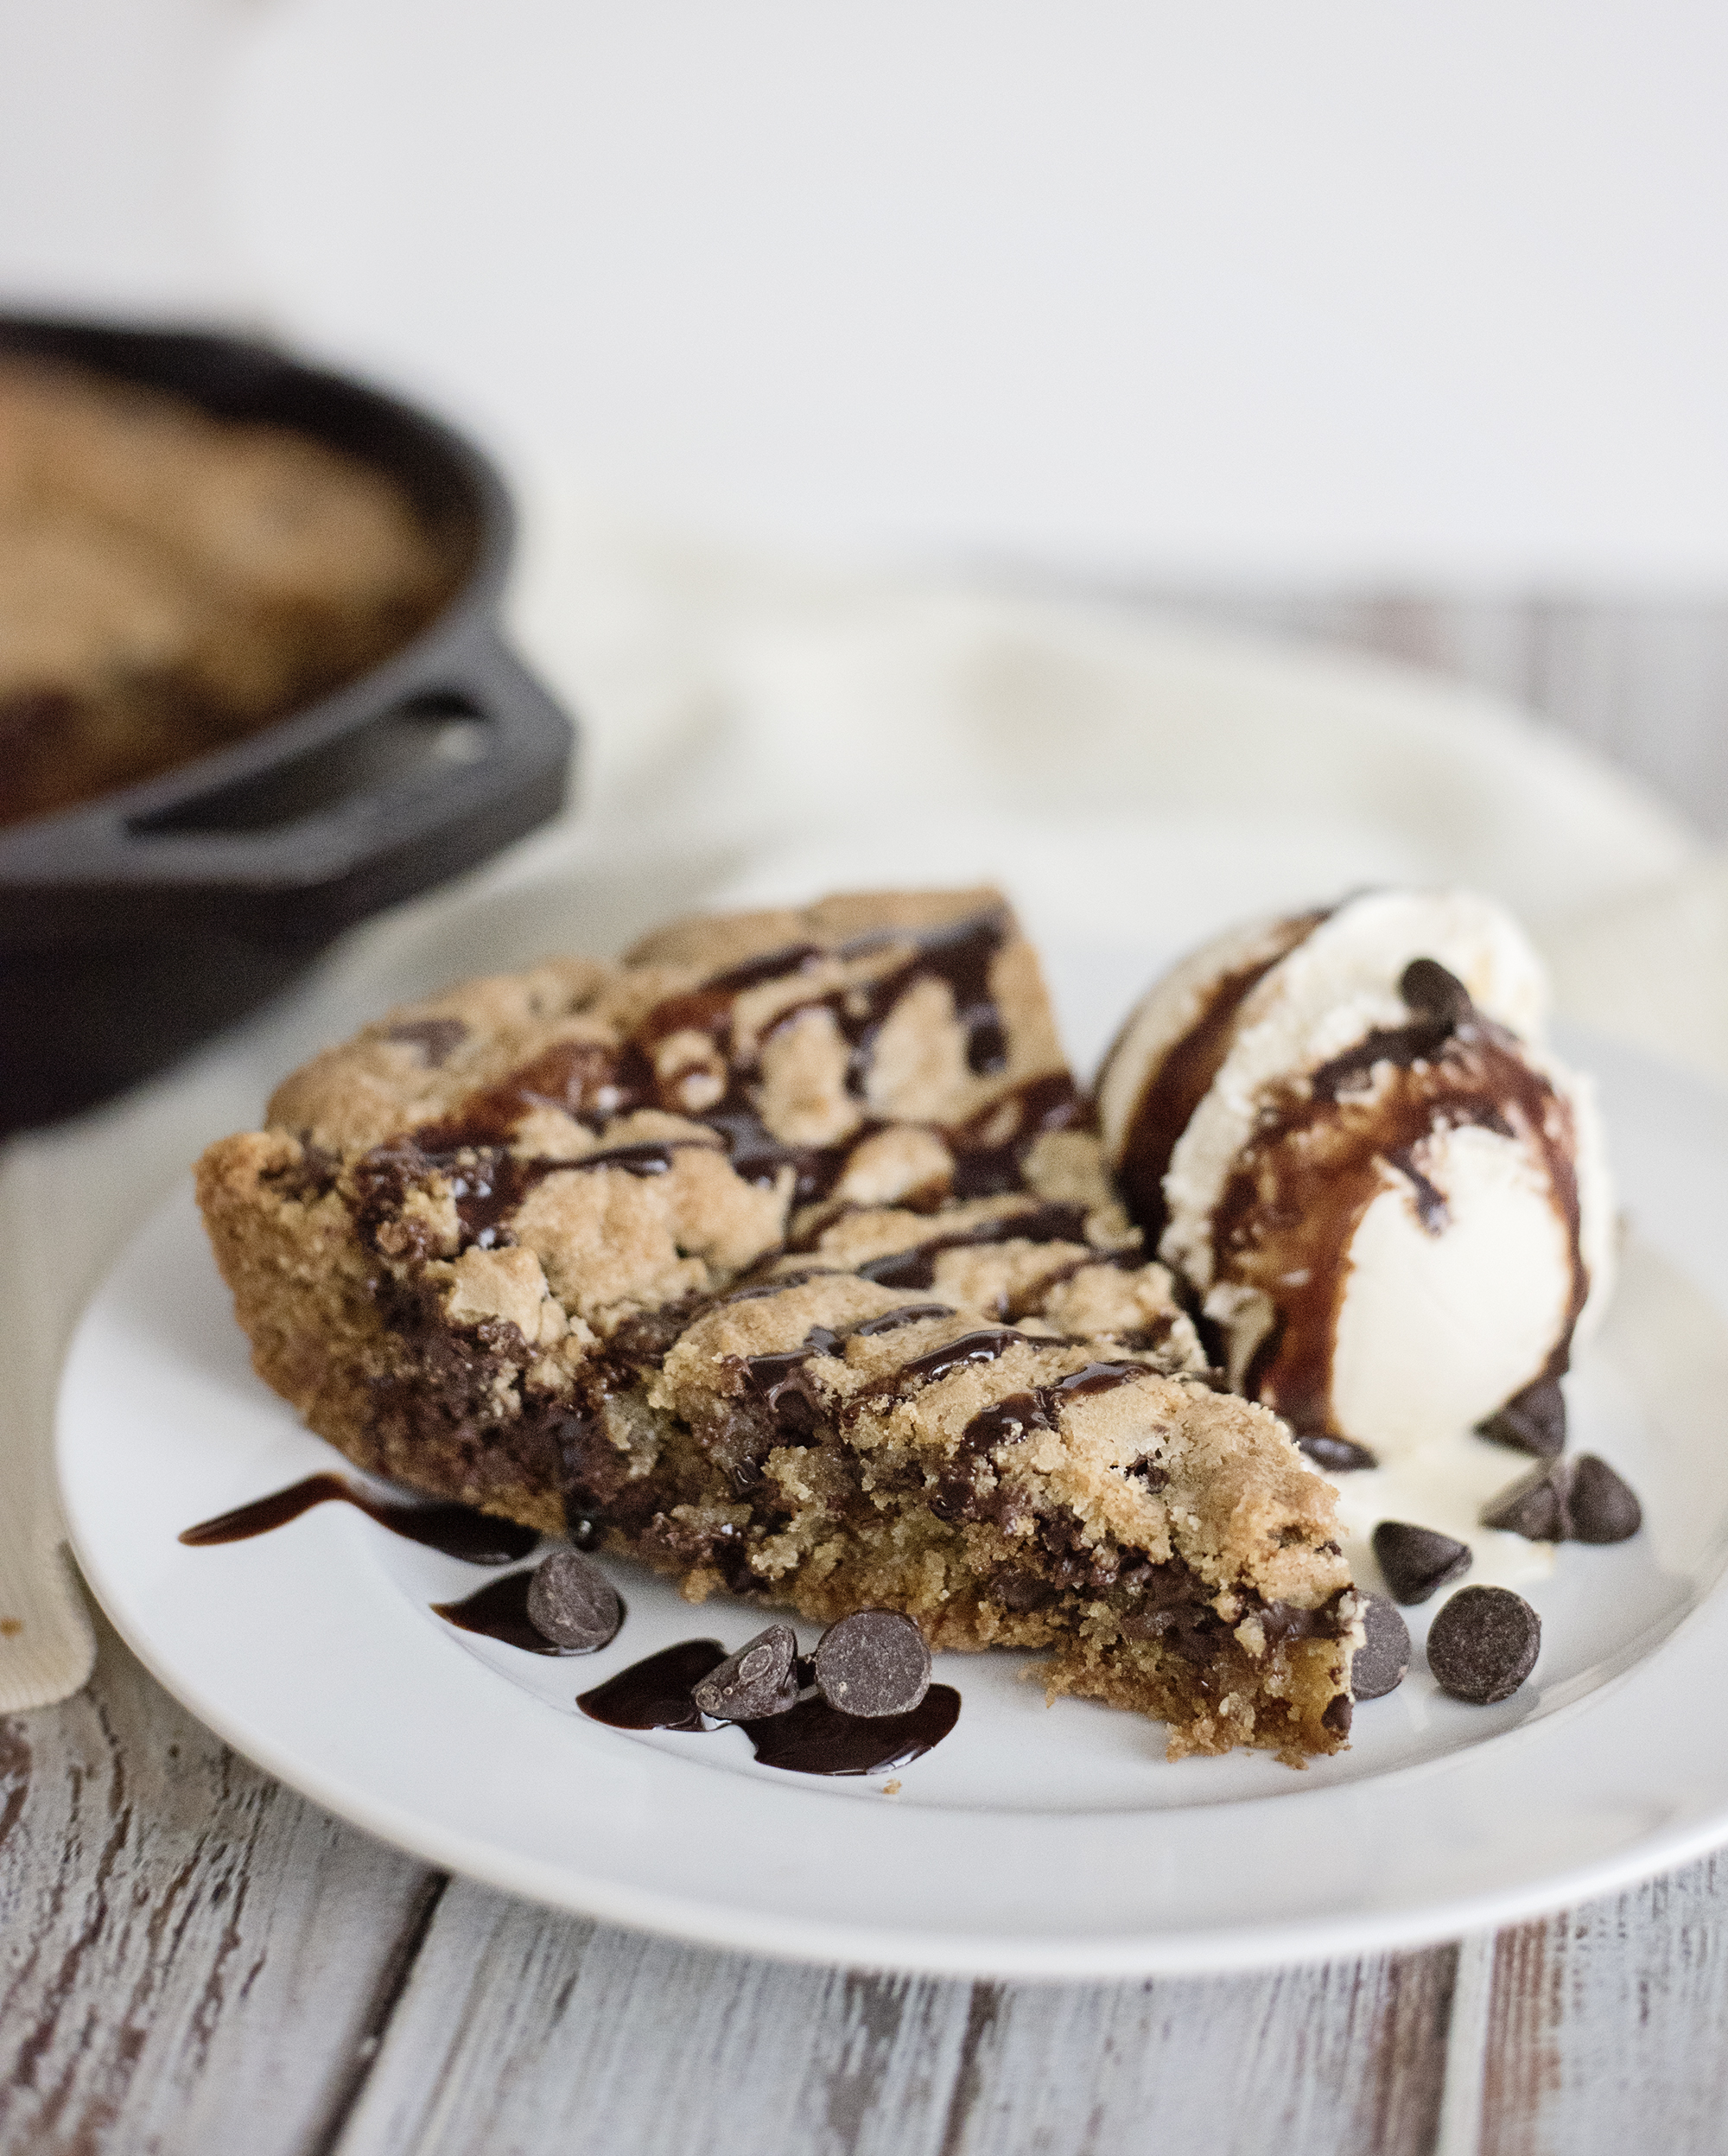 Skillet Cookie Cake - Restaurant Style! This recipe is seriously better than a birthday cake. Moist, delicious and easy to make.